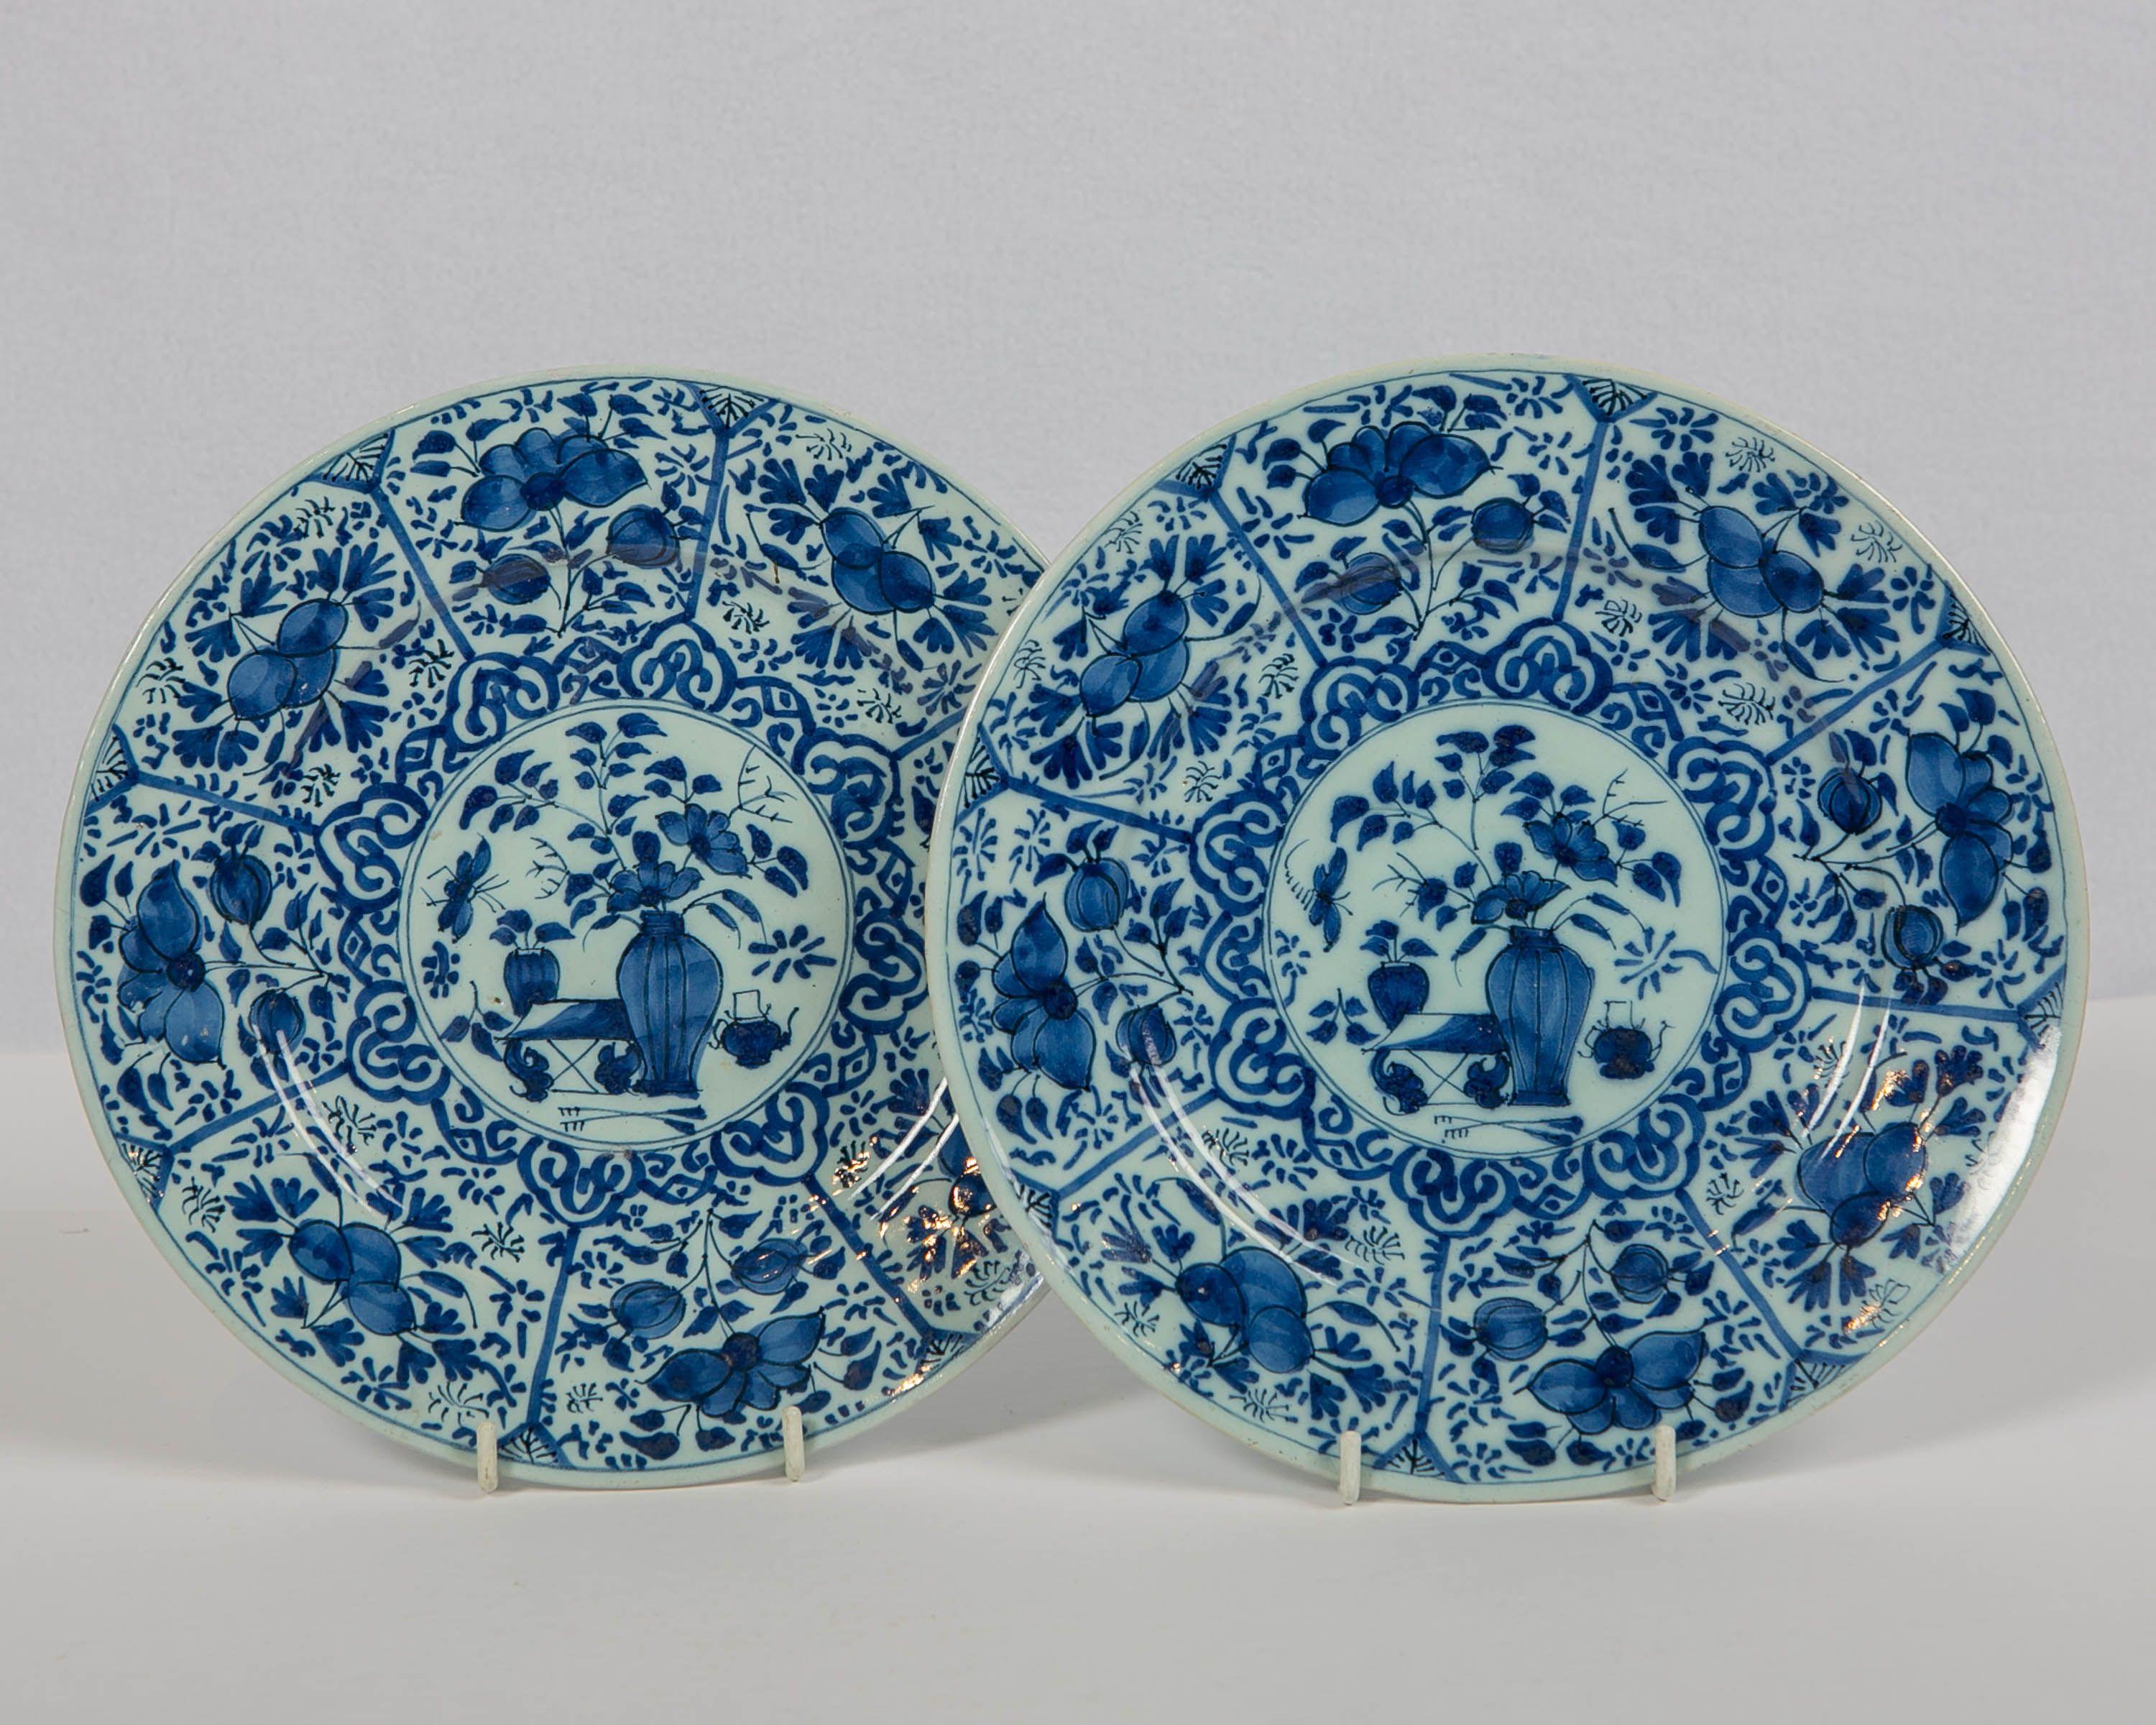 18th Century Pair of Dutch Delft Blue and White Pancake Plates Made 1705-1725